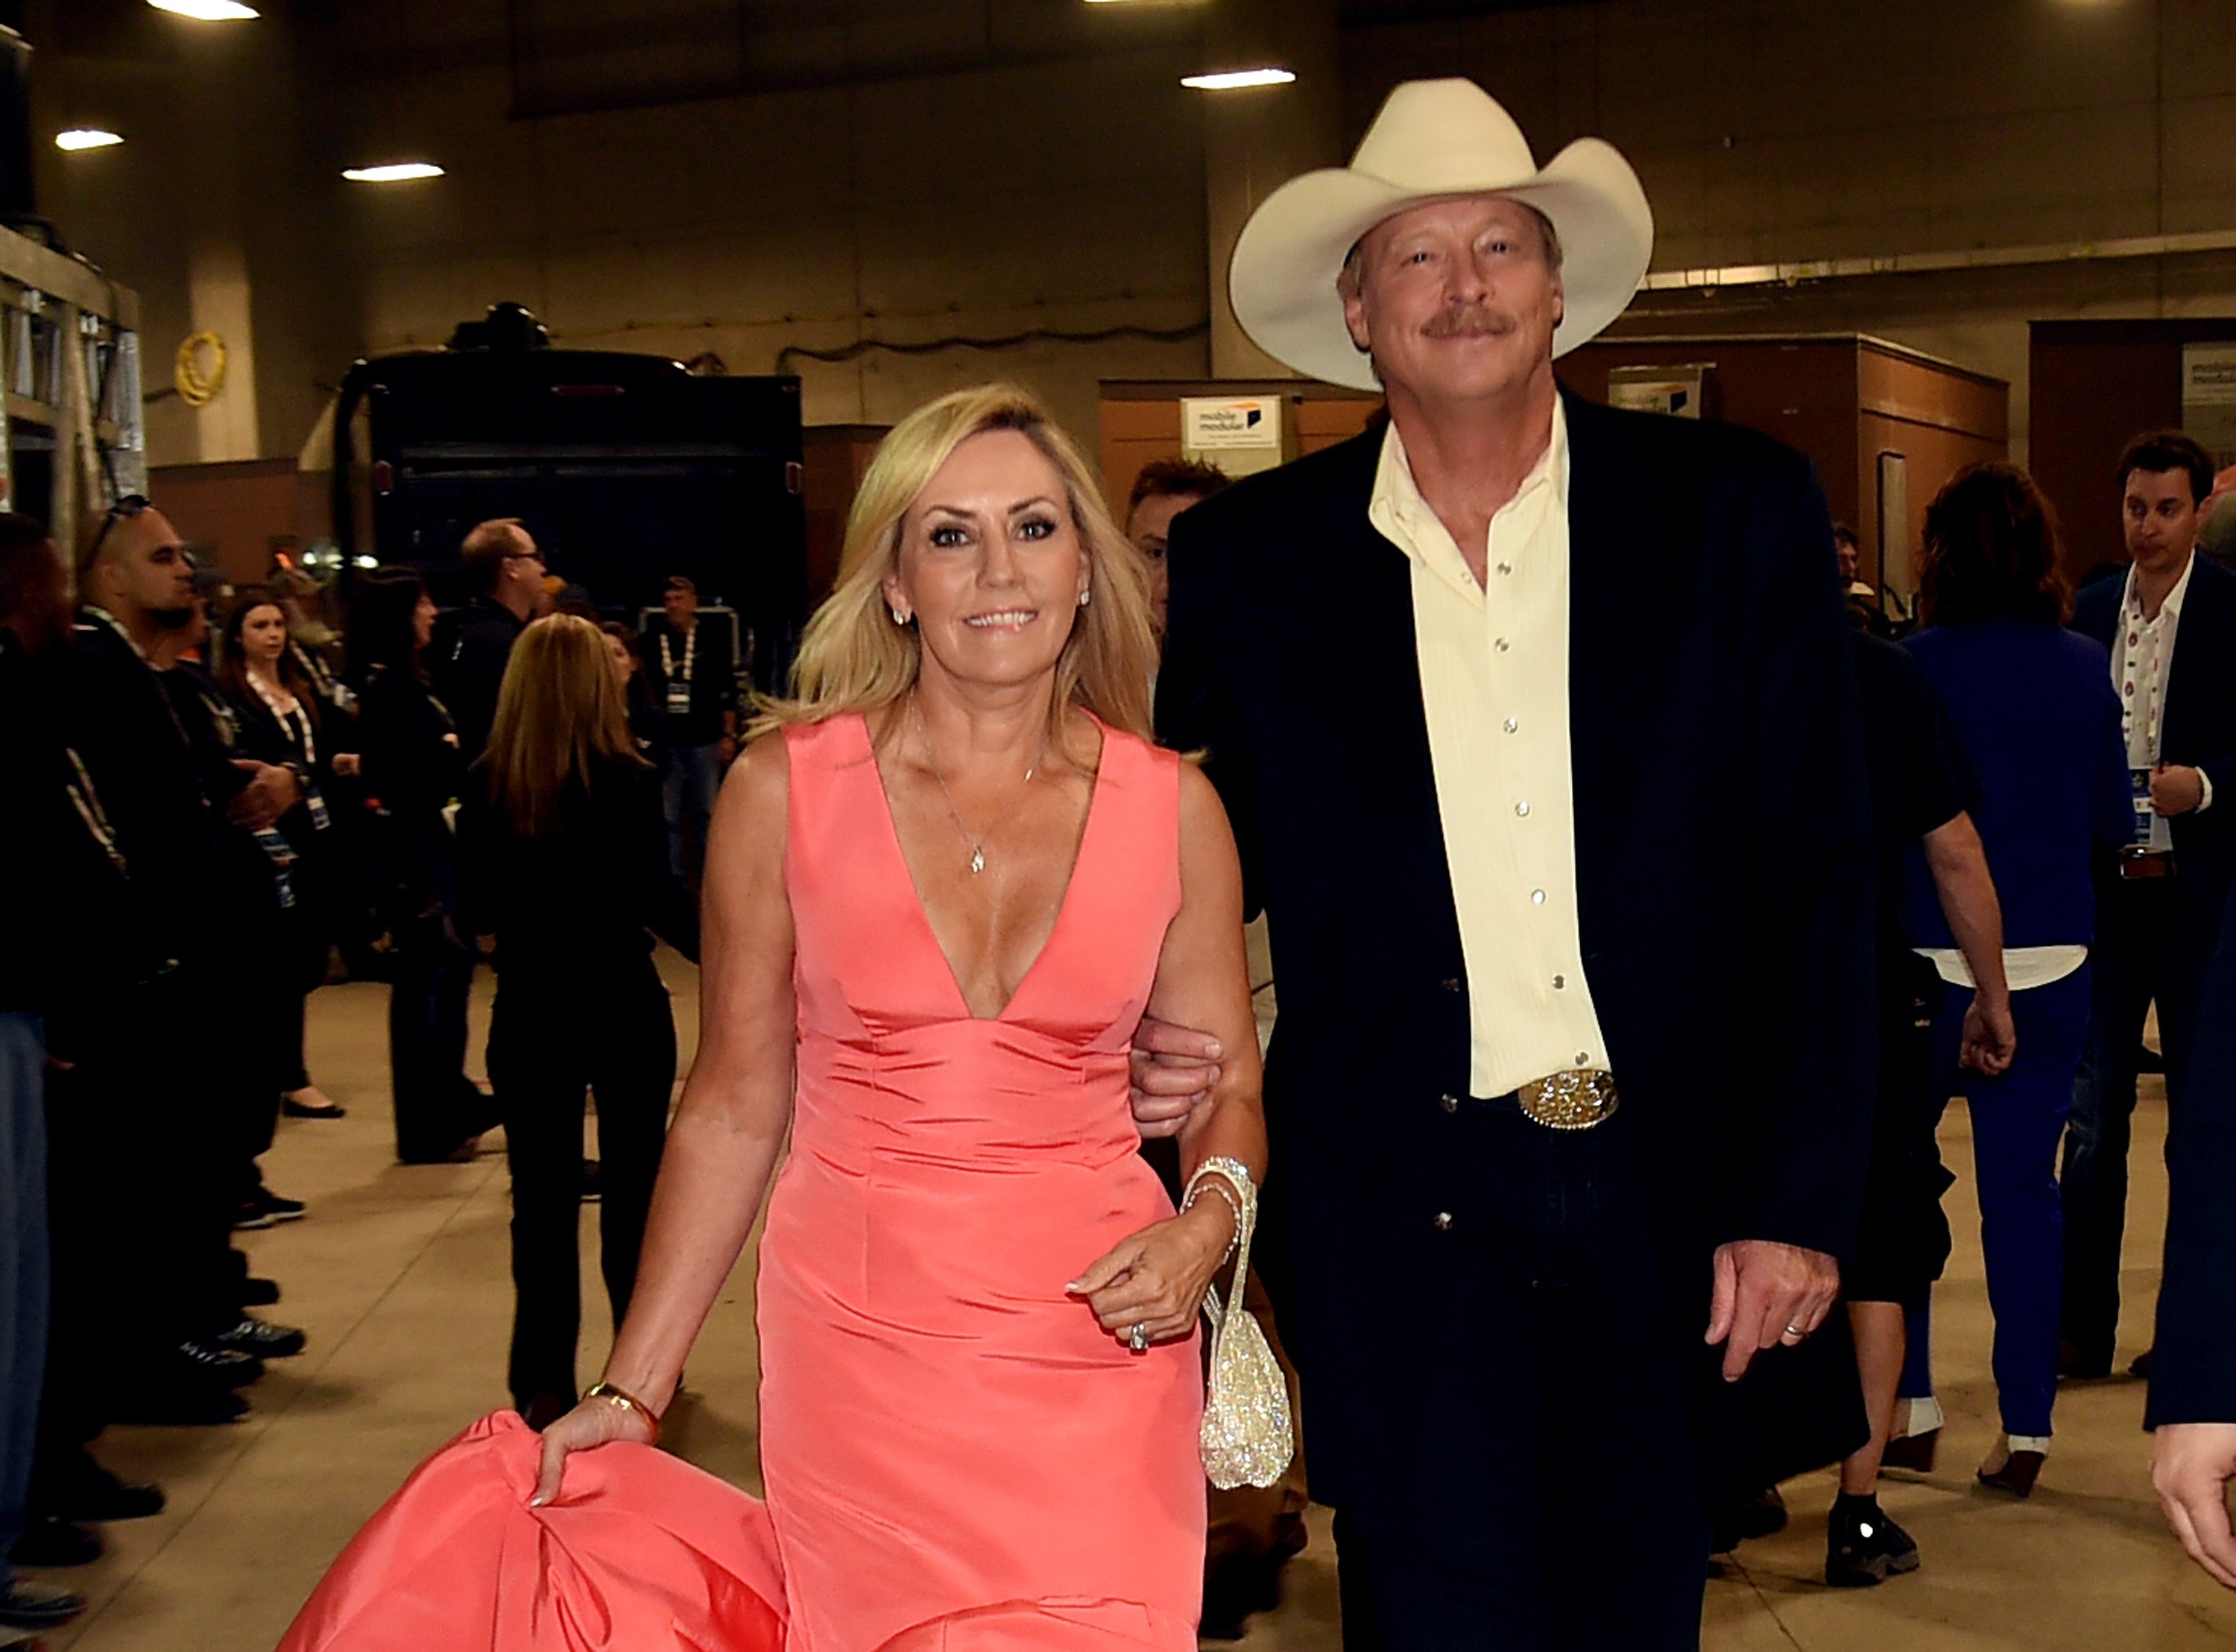 Alan Jackson and his wife Denise attend the 50th Academy Of Country Music Awards at AT&T Stadium on April 19, 2015 in Arlington, Texas. | Source: Getty Images